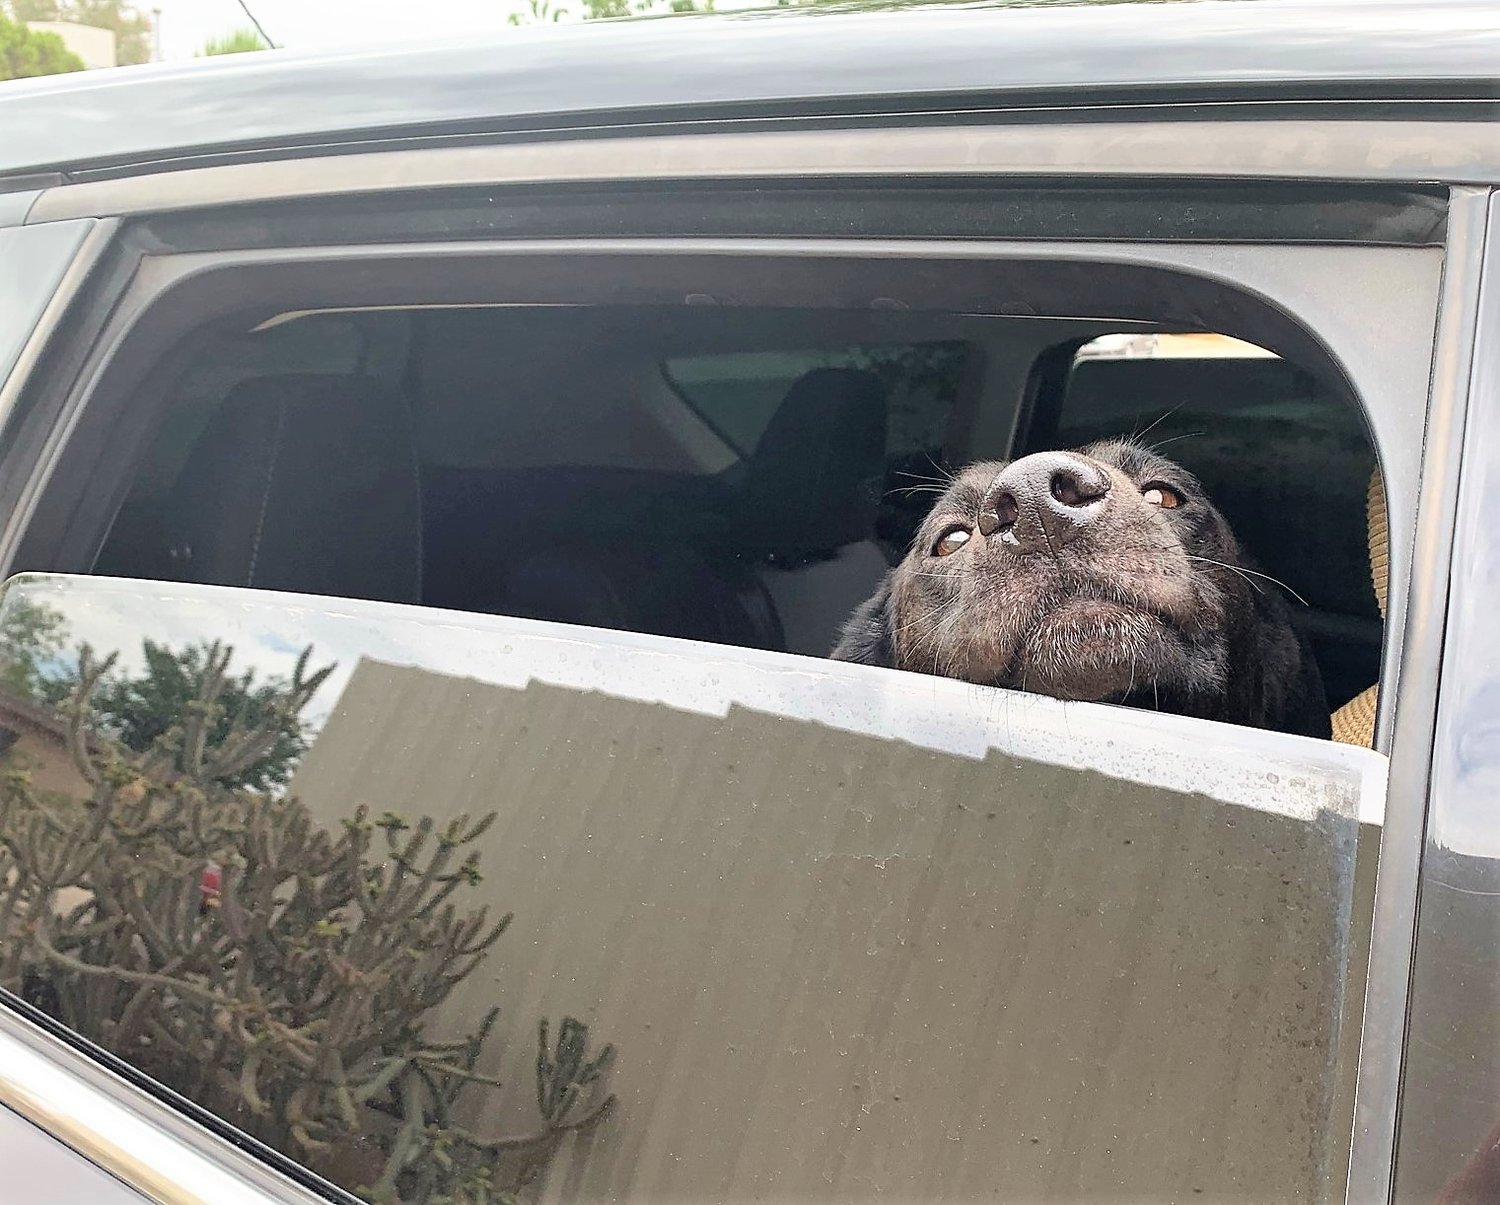 Leaving a dog alone in a vehicle in the hot sun for any amount of time can be dangerous.